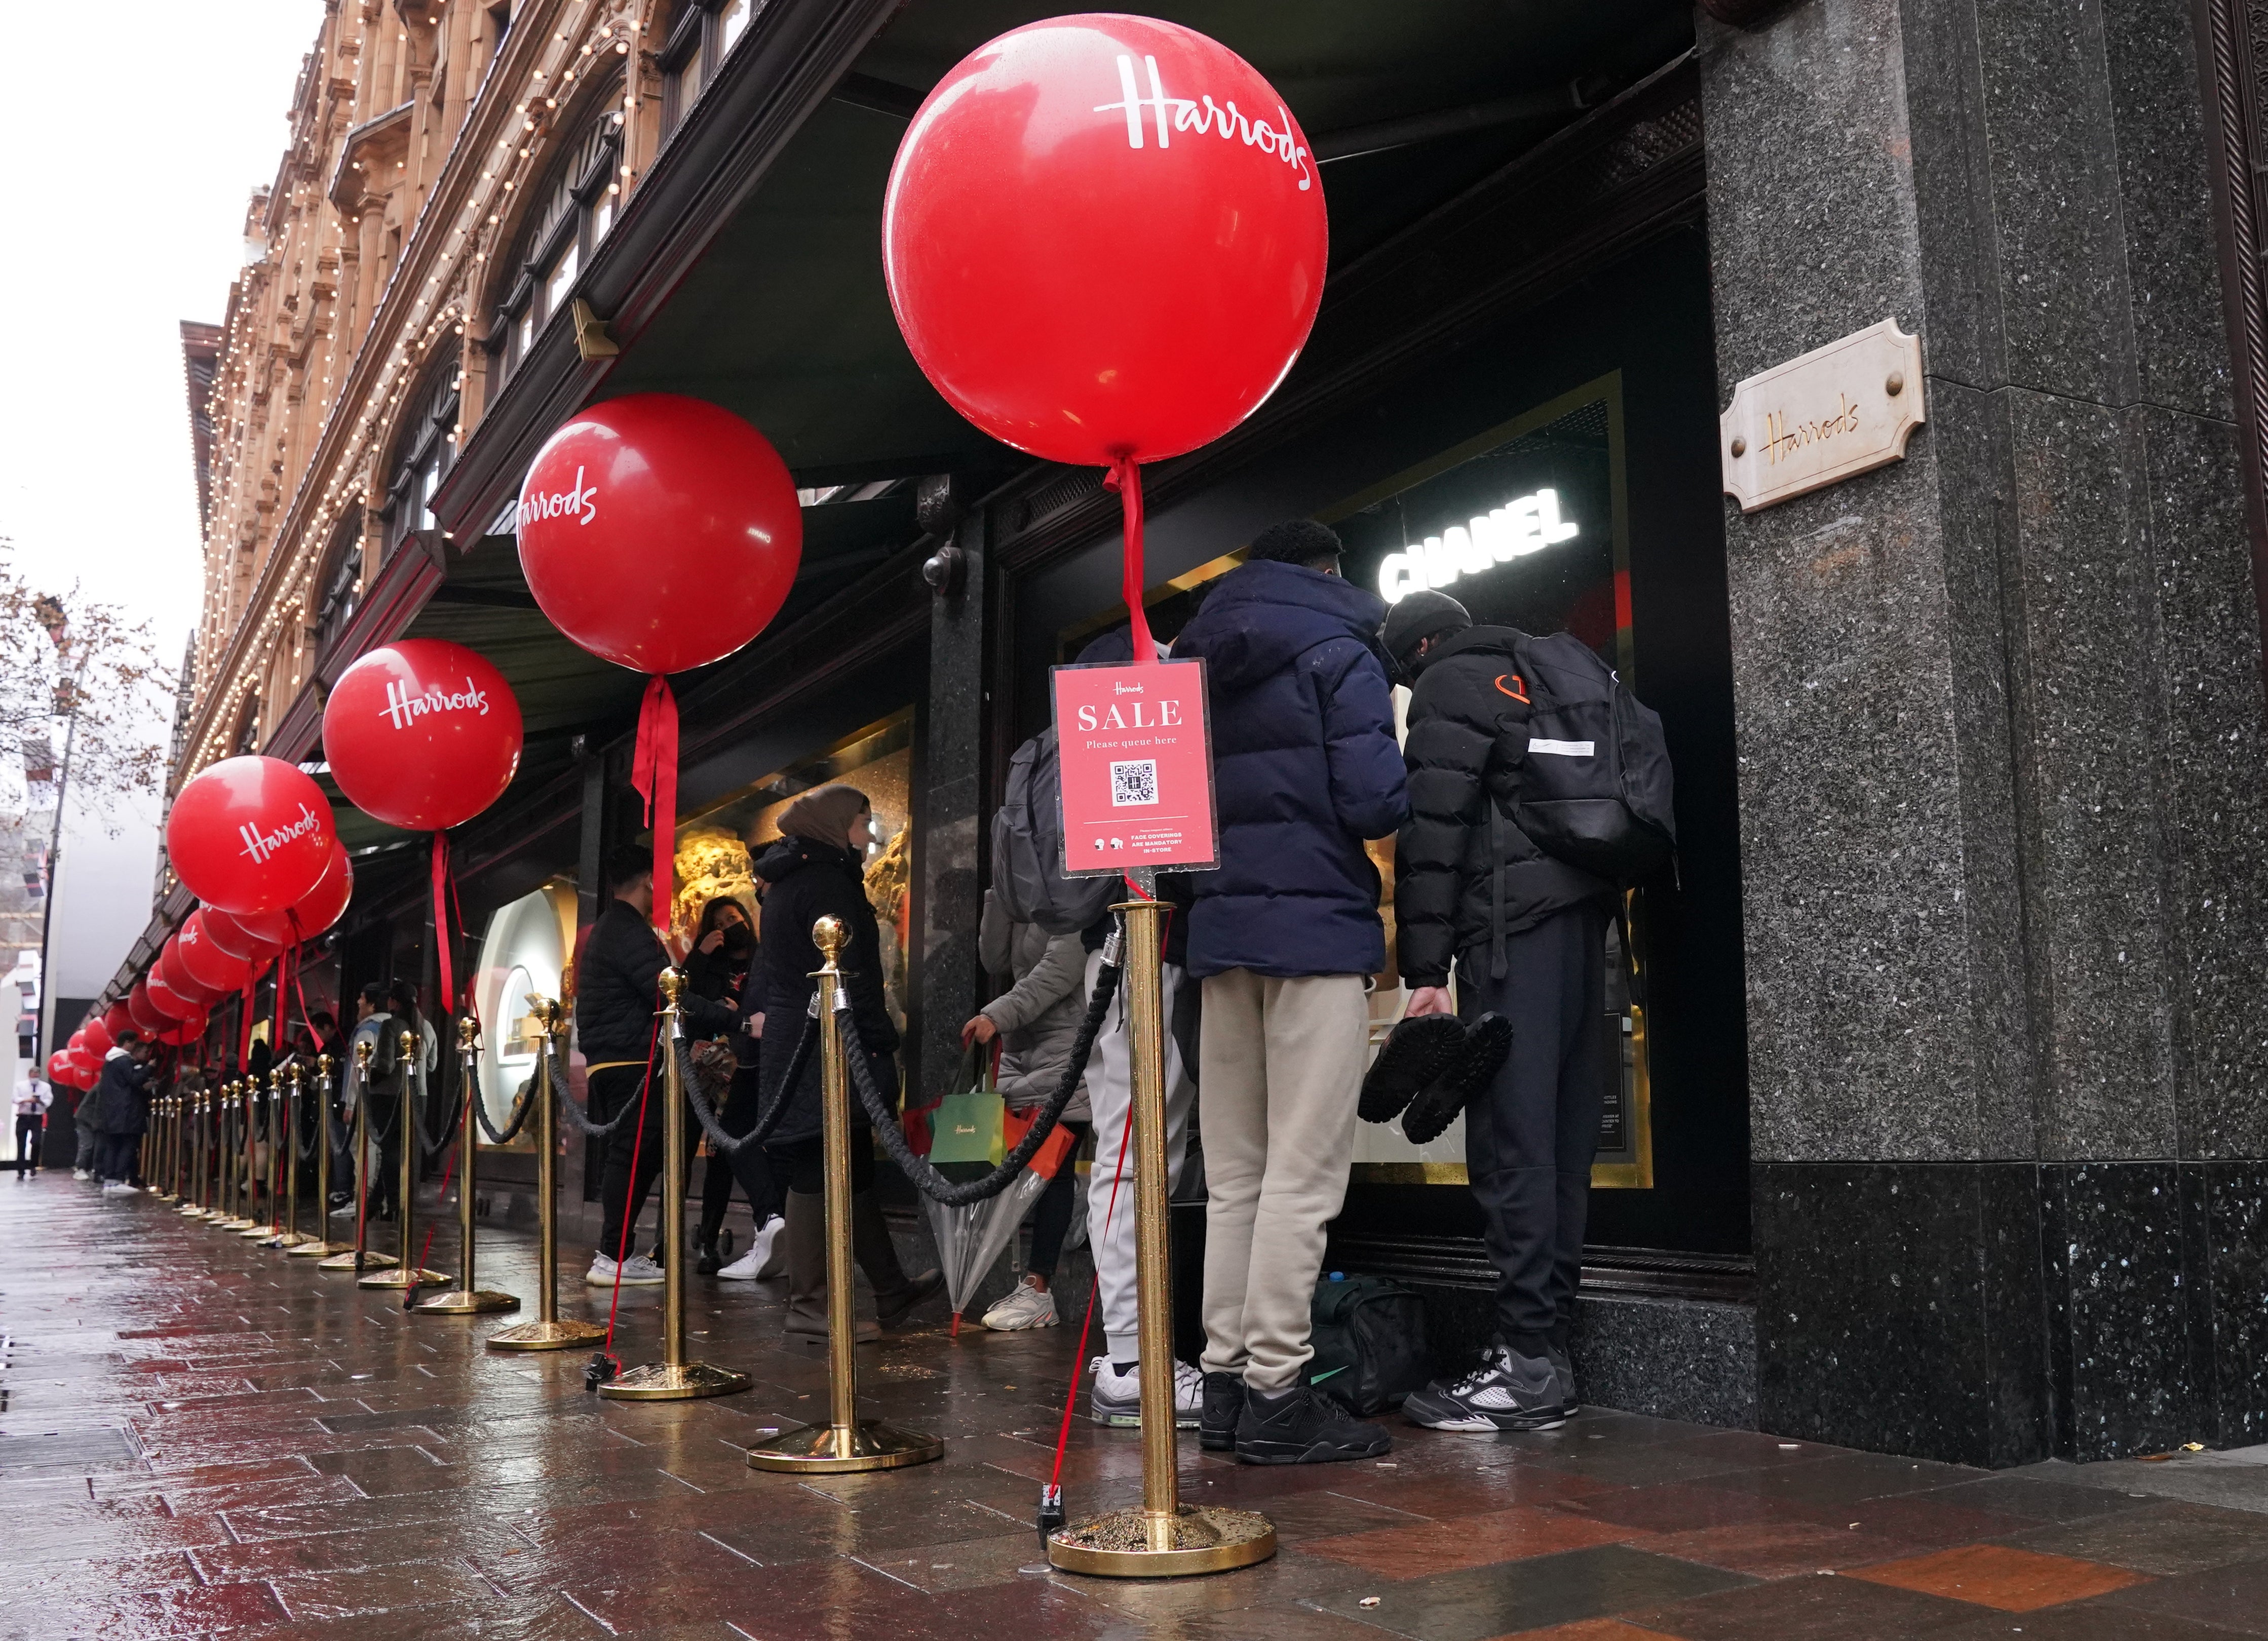 Customers begin to form a queue outside the Harrods store in Knightsbridge, London, waiting for the start the Boxing Day sales (Jonathan Brady/PA)